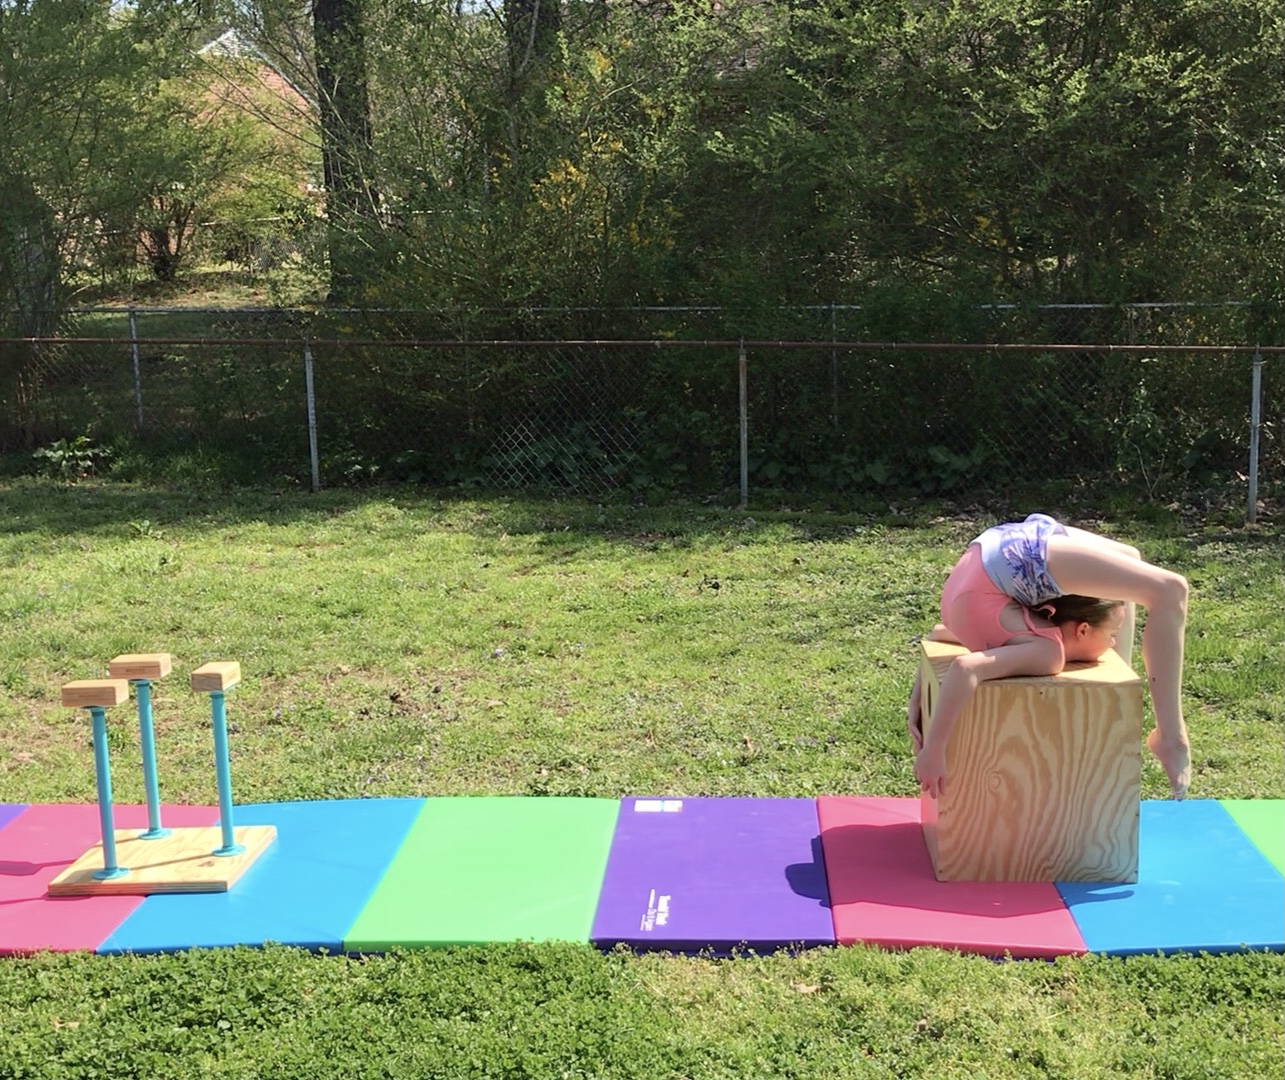 Jocelyn performs a backbend on a cube that is part of her outdoor stage